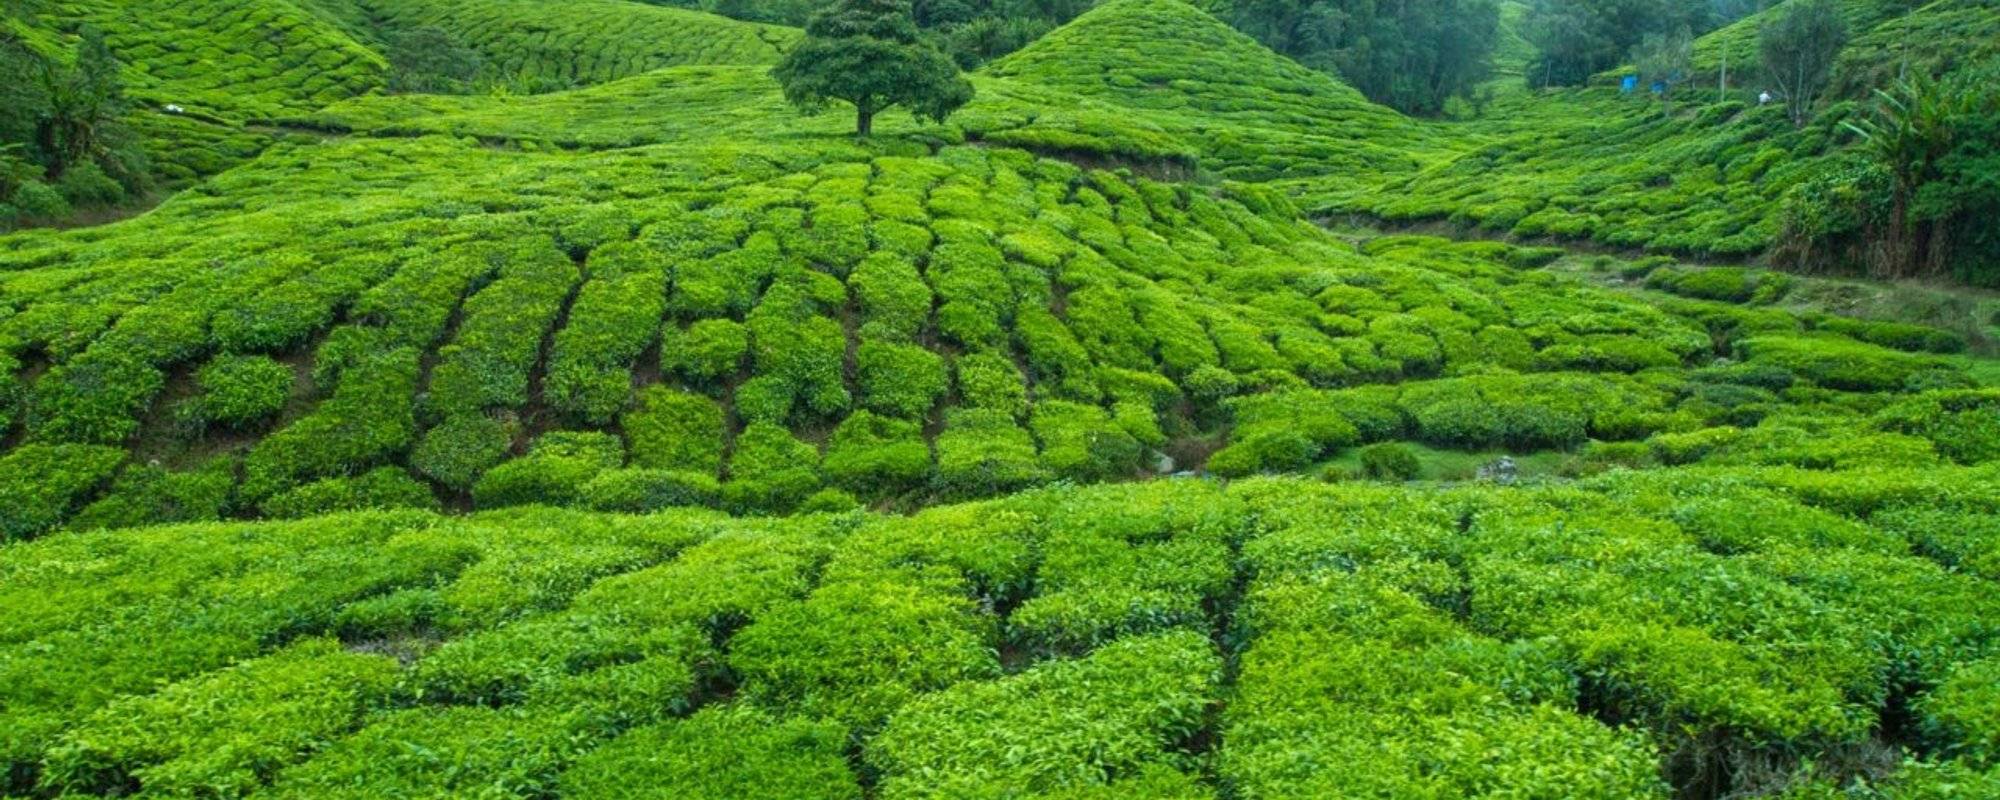 Cameron Highlands: Is it really that beautiful?